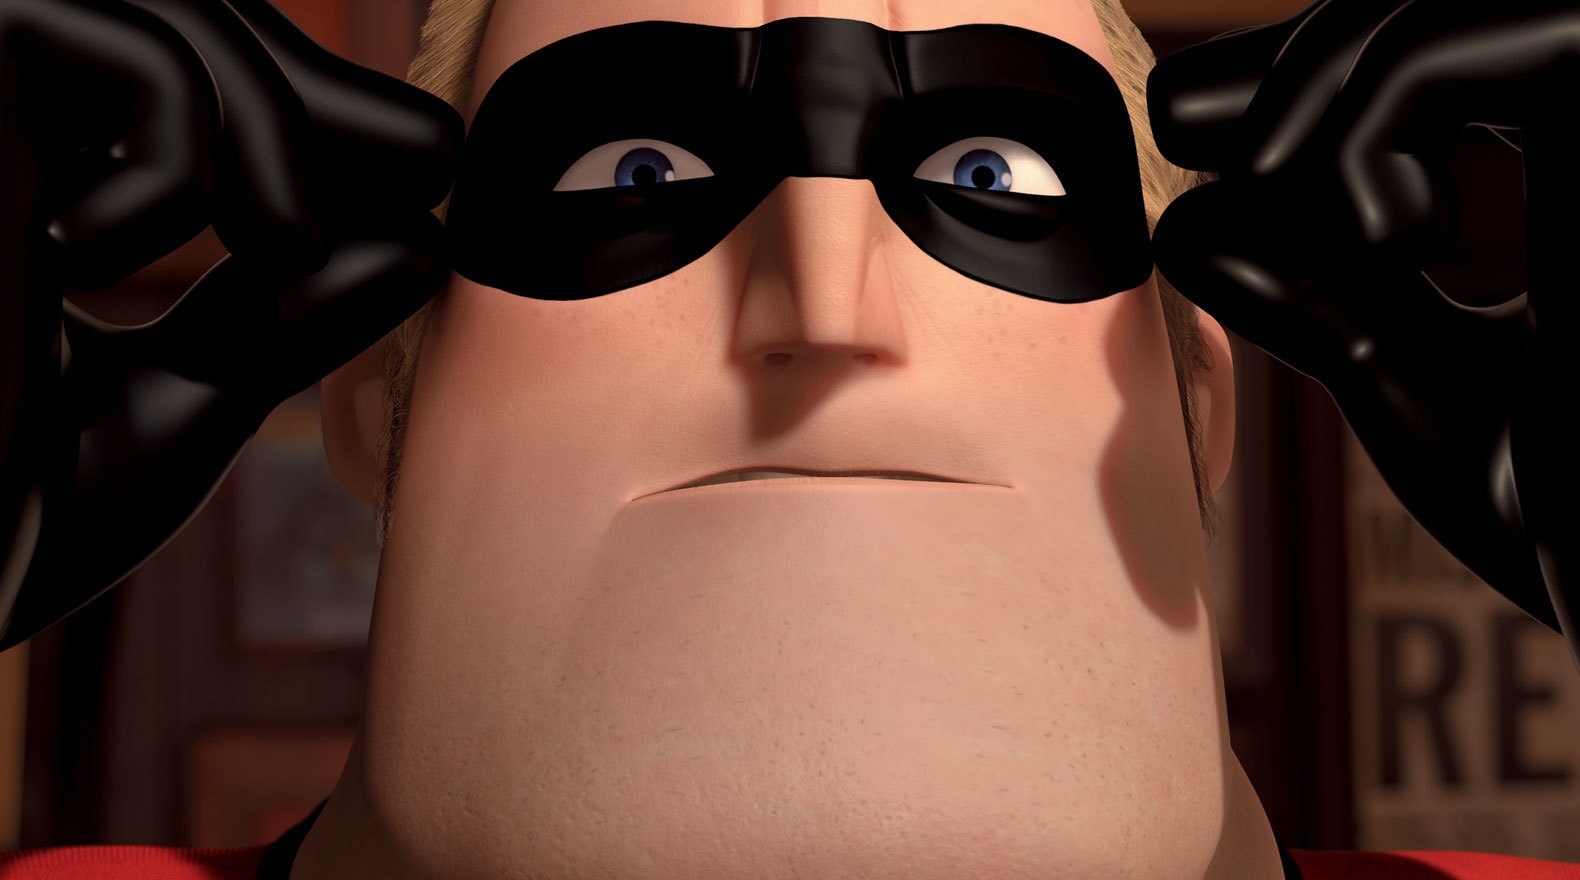 Mr. Incredible puts on his mask in "The Incredibles"